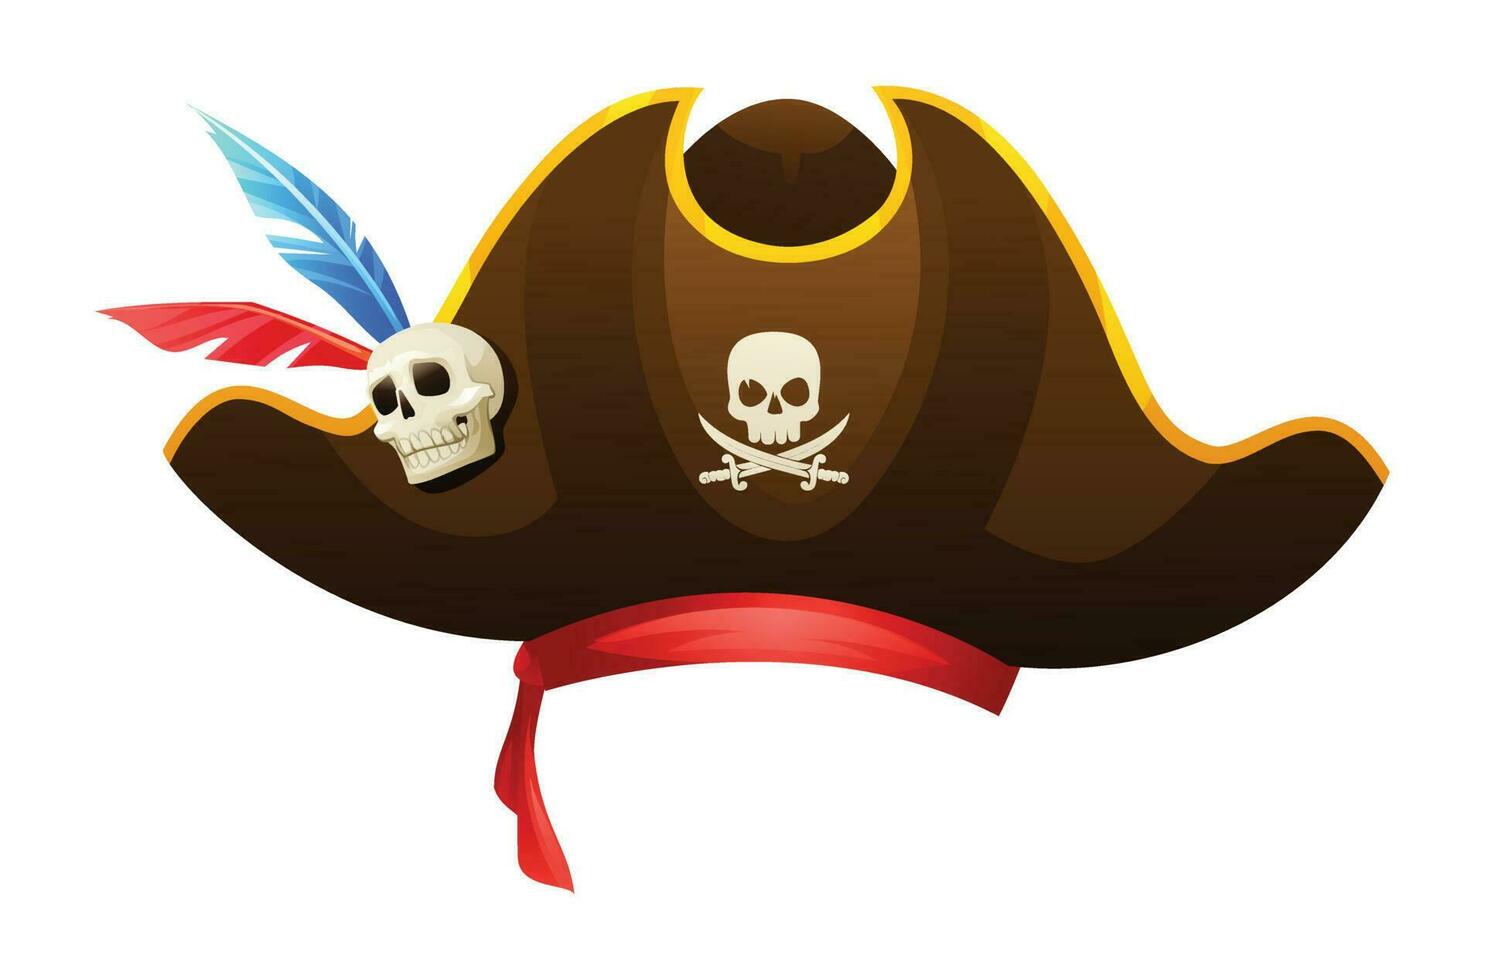 Pirate hat with skull, crossbones and feathers vector illustration